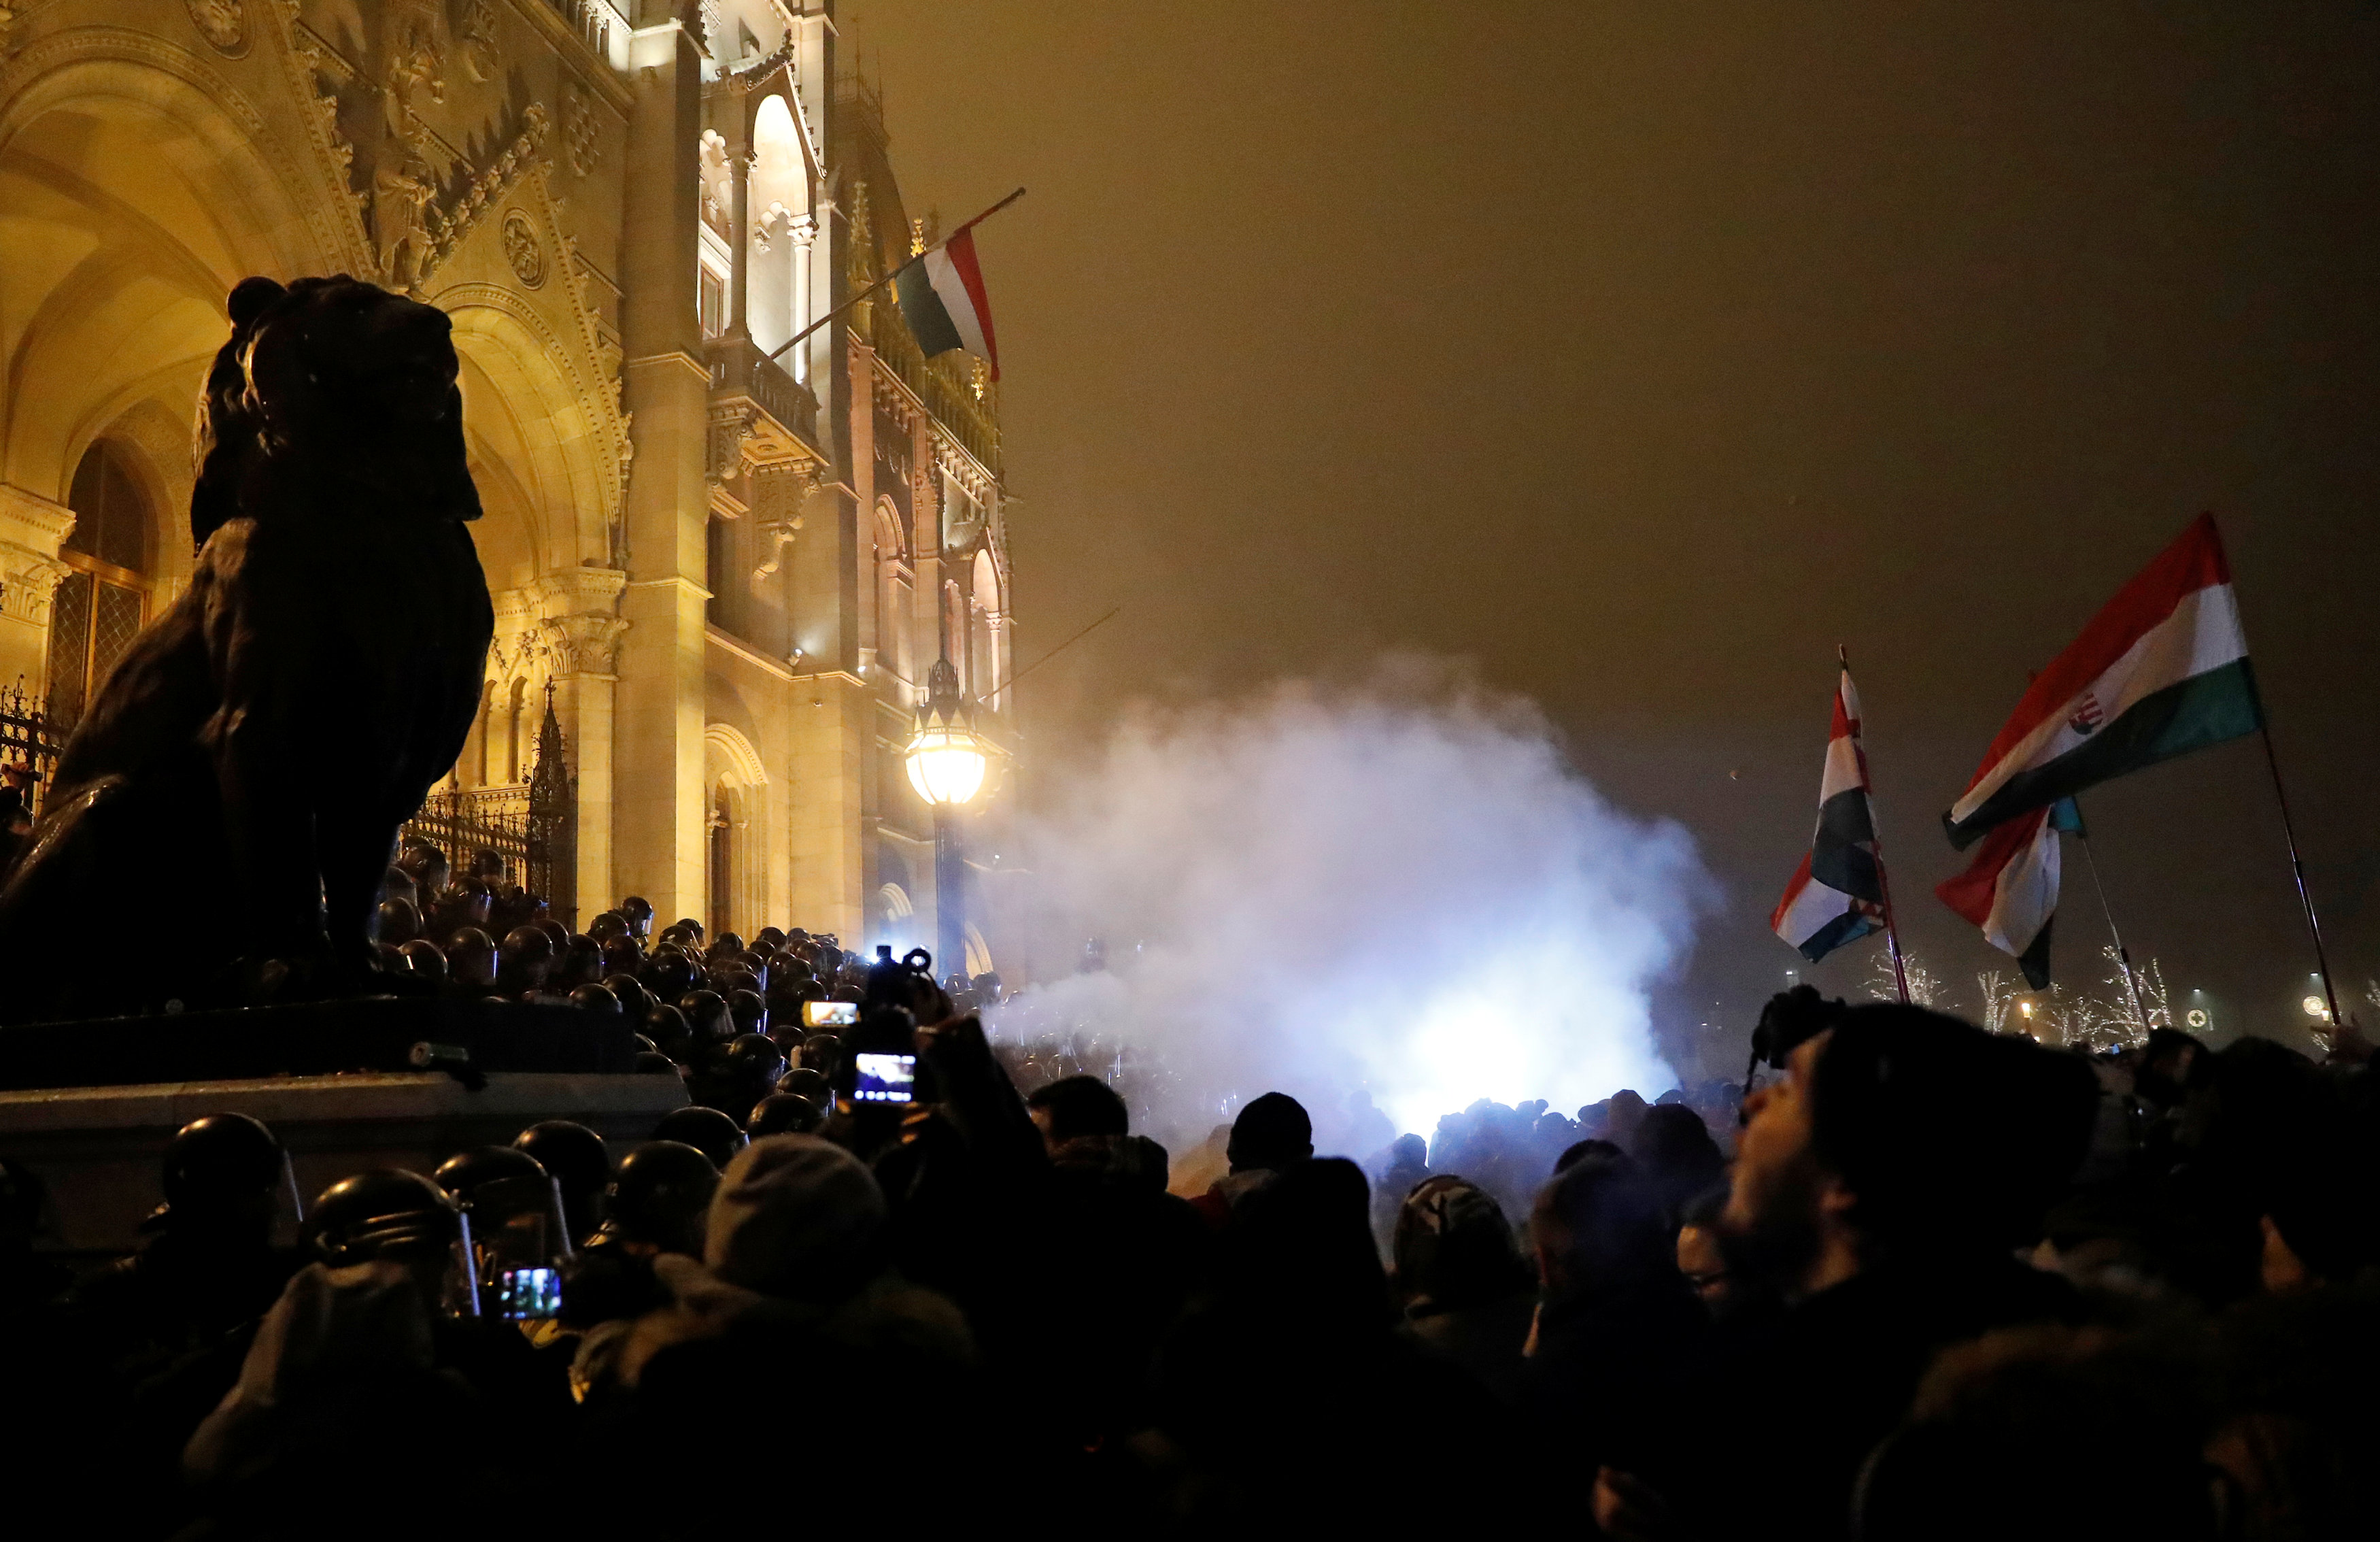 2018-12-13T223656Z_387638404_RC19E2D62A50_RTRMADP_3_HUNGARY-PROTESTS